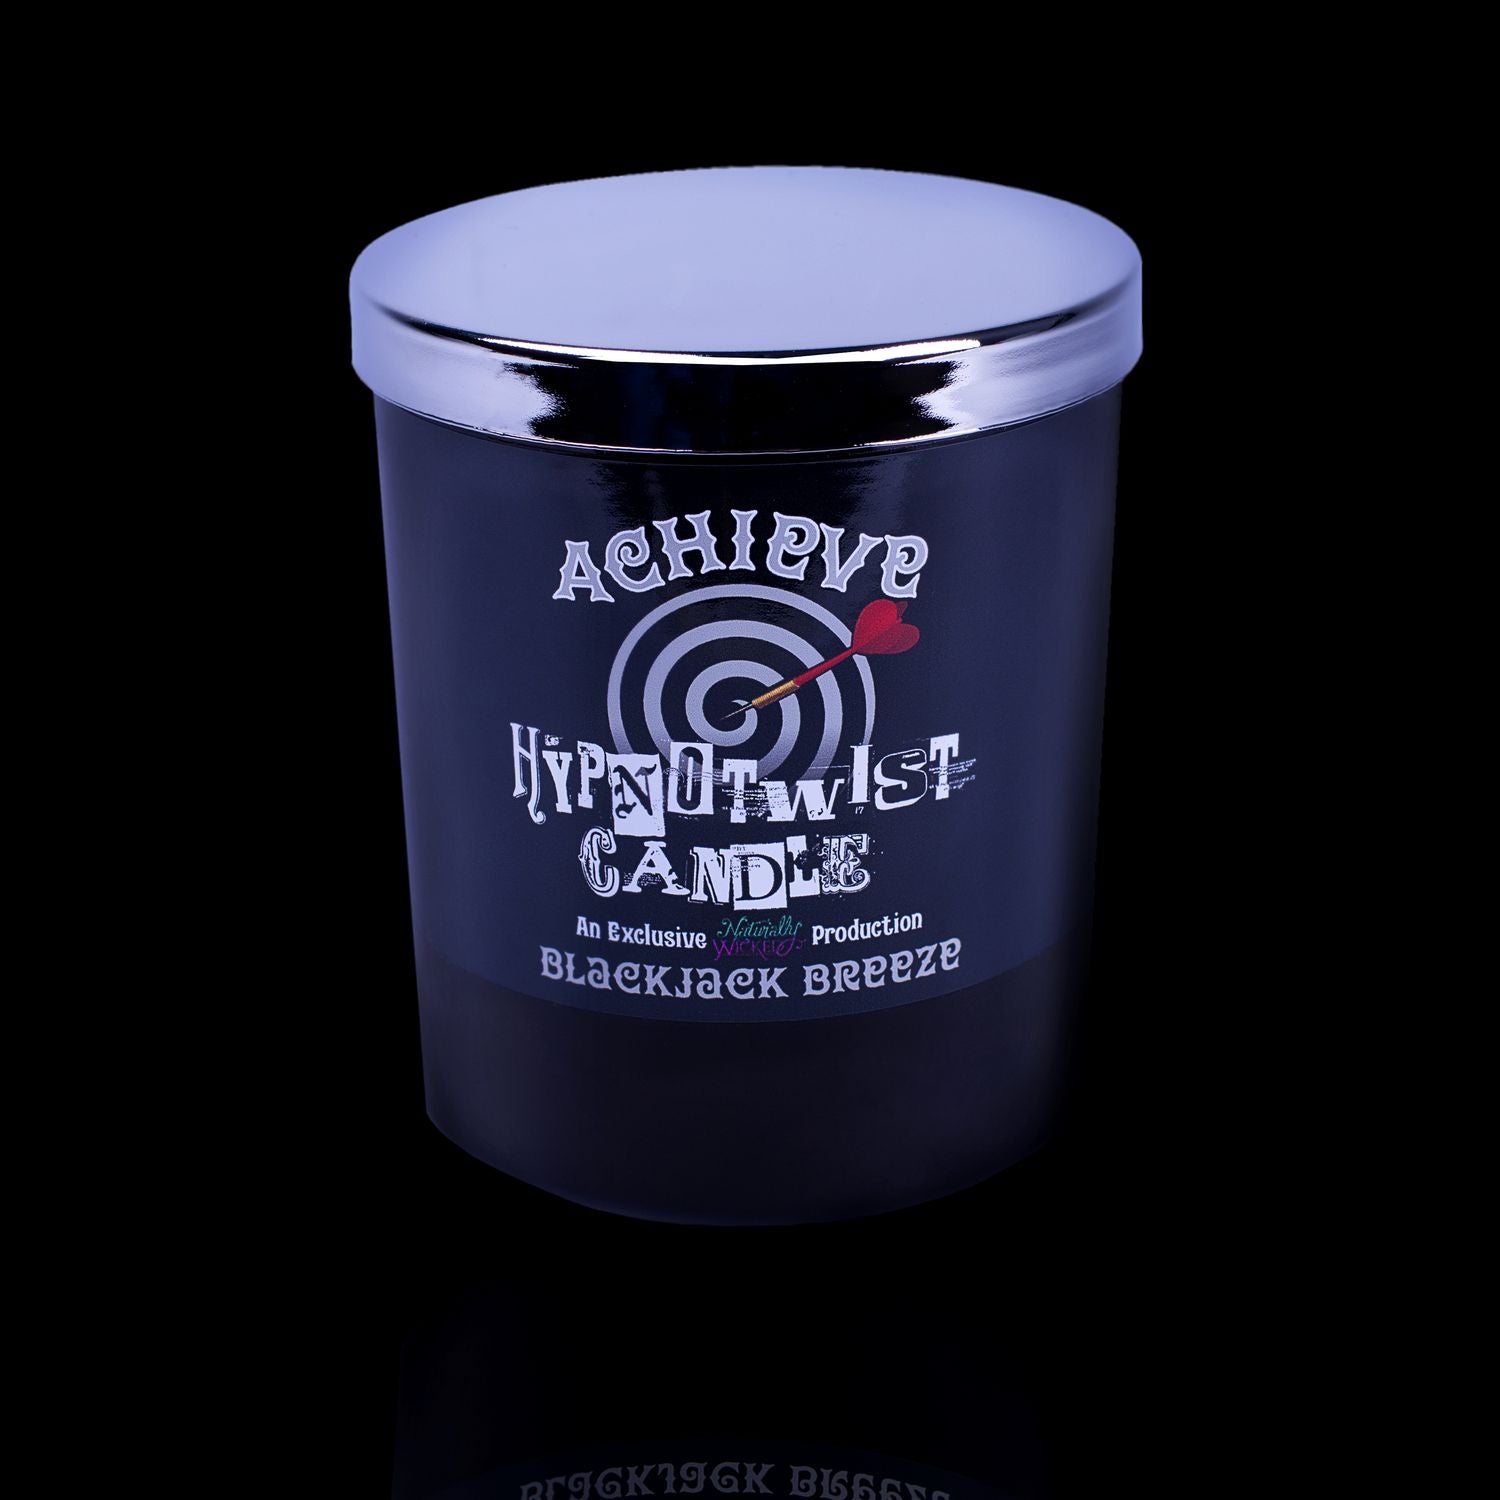 Achieve The Impossible With The Naturally Wicked Hypnotwist Achieve Candle Featuring Plant-based Soy Black Wax scented with Blackjack Breeze & Includes A Zebra Jasper Crystal Spinning Top & Mirrored Lid